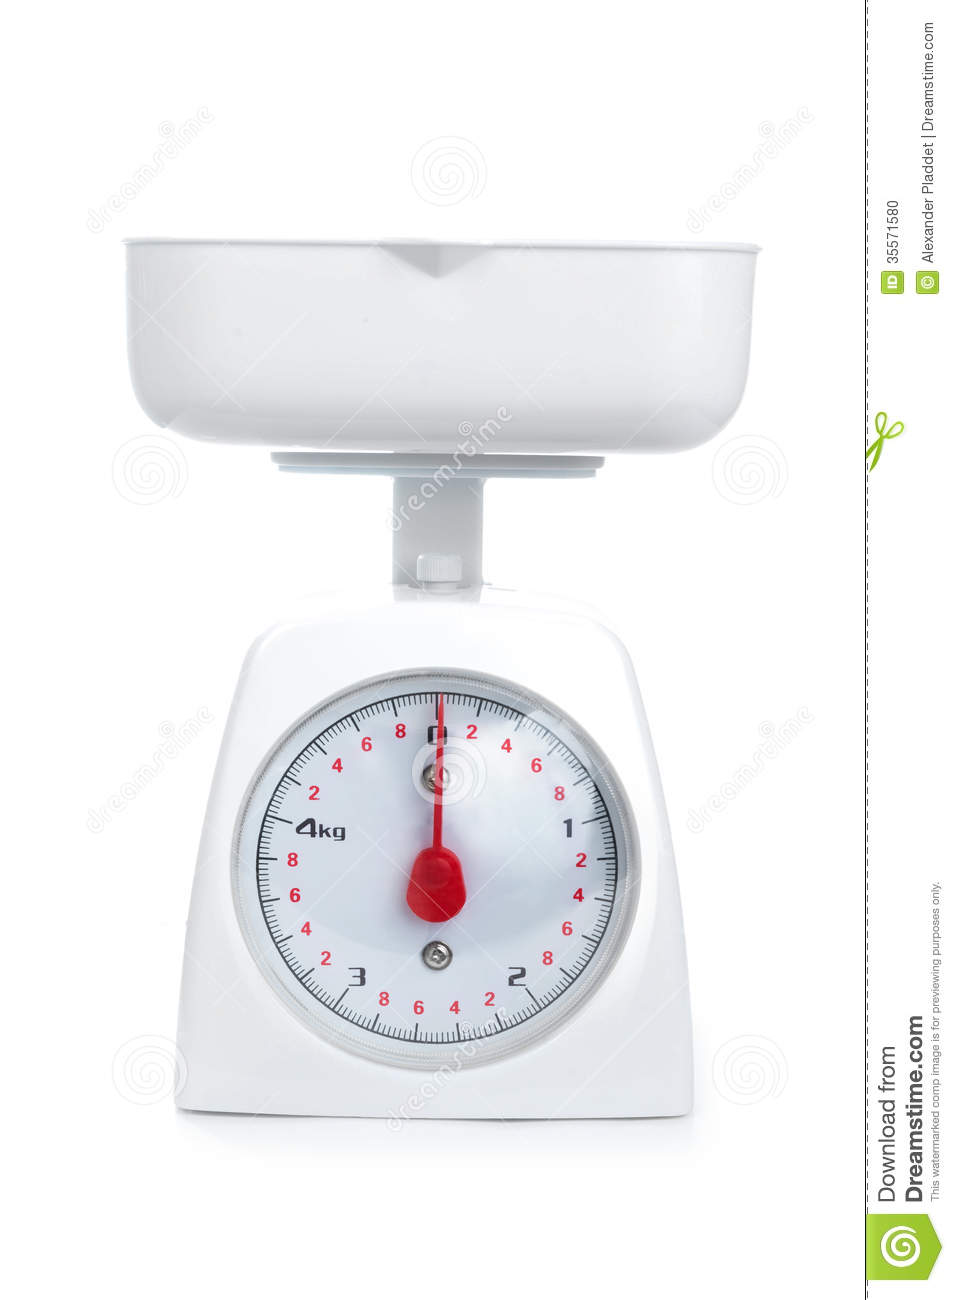 Kitchen Weighing Scale Isolated On A White Background 